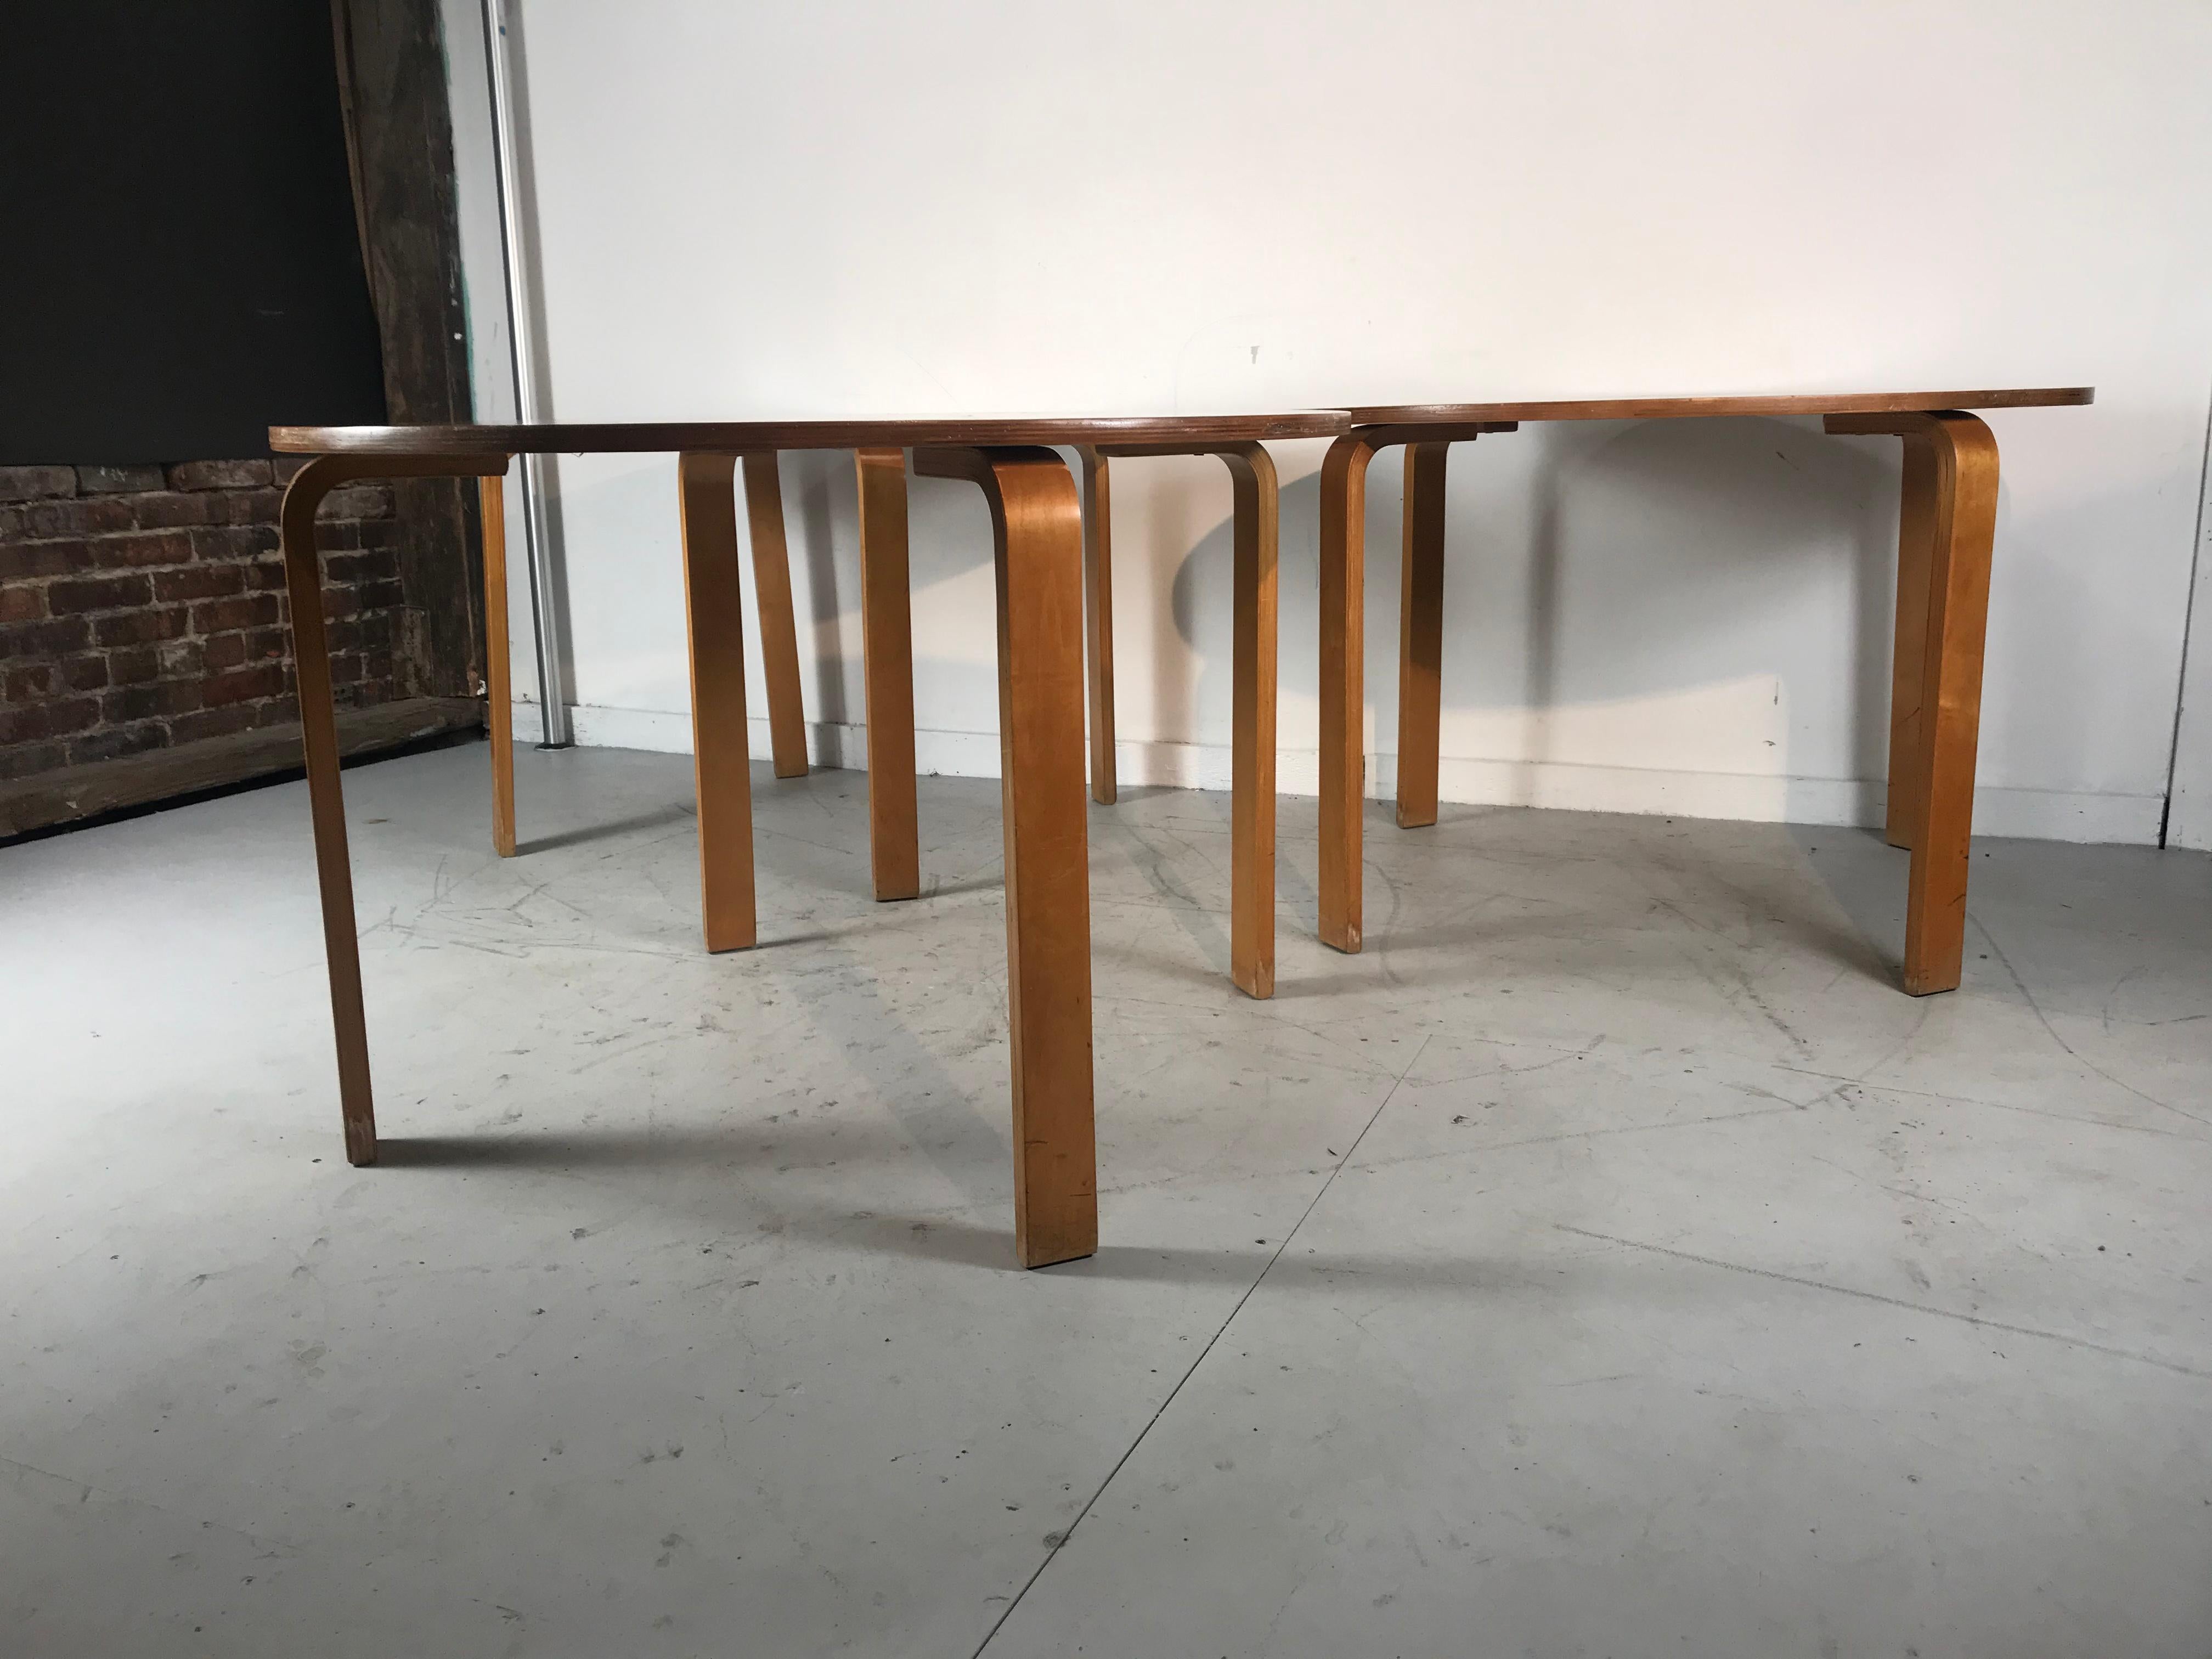 American Classic Bent Plywood Bauhaus Style Dining Tables Attributed to Thonet